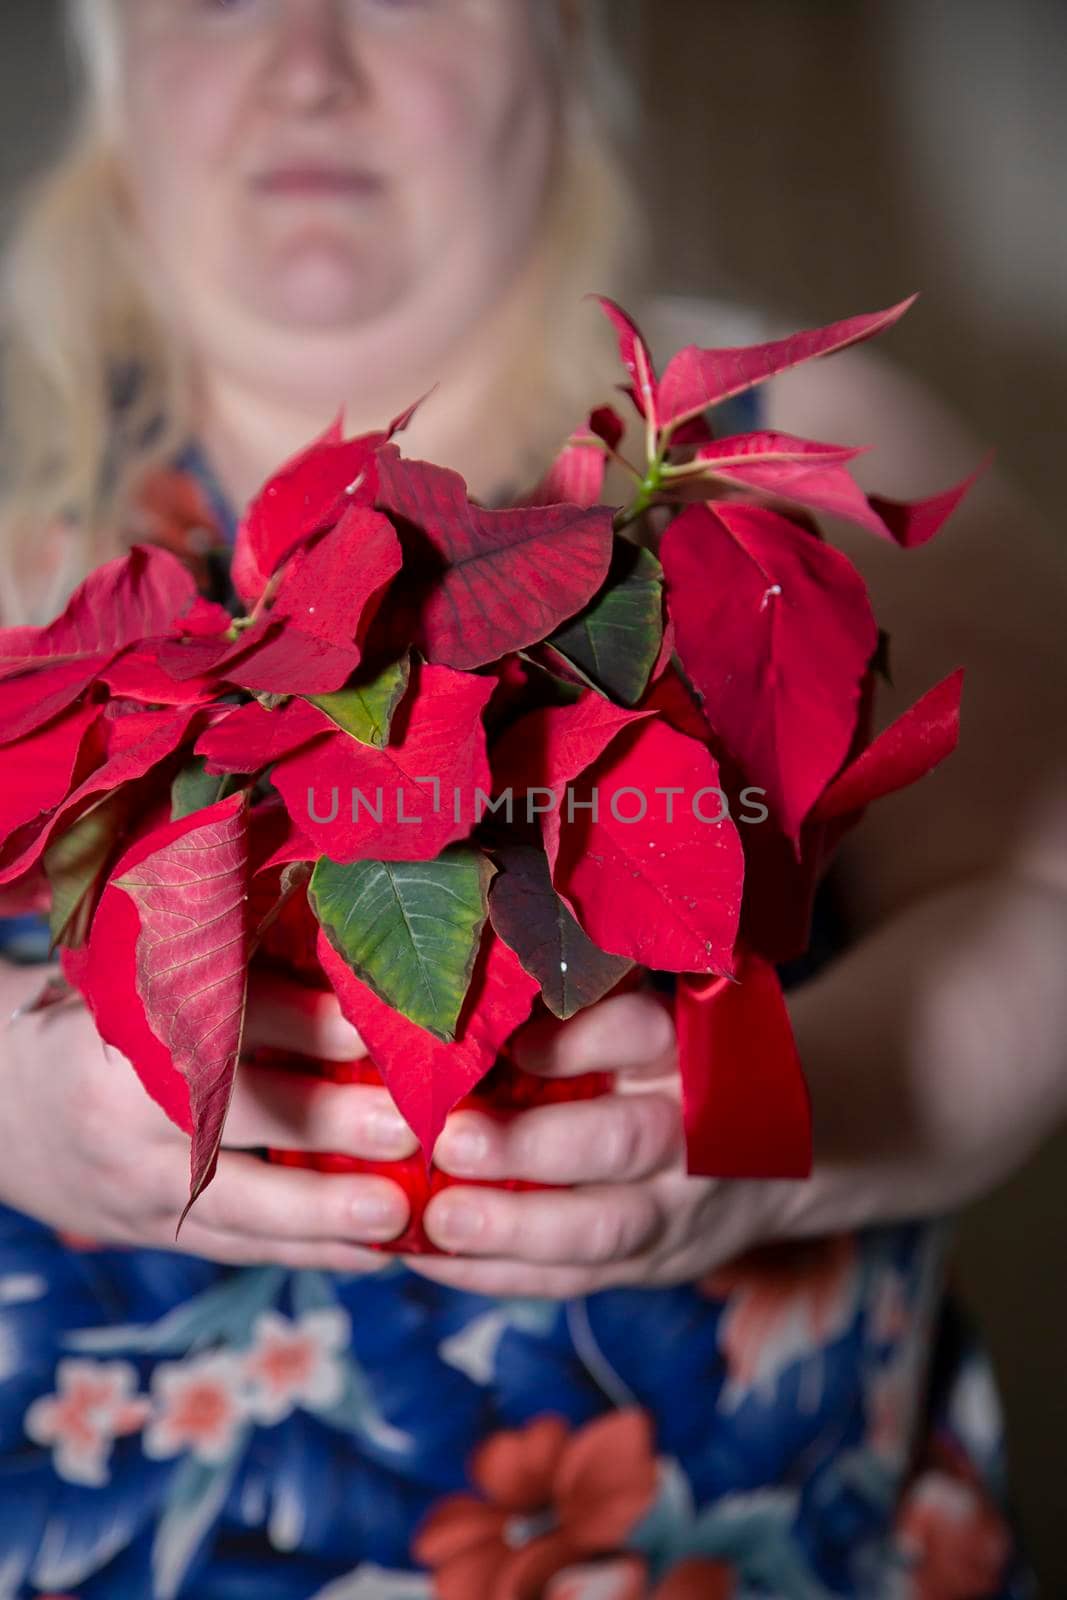 Woman Holding Poinsettia by tornado98